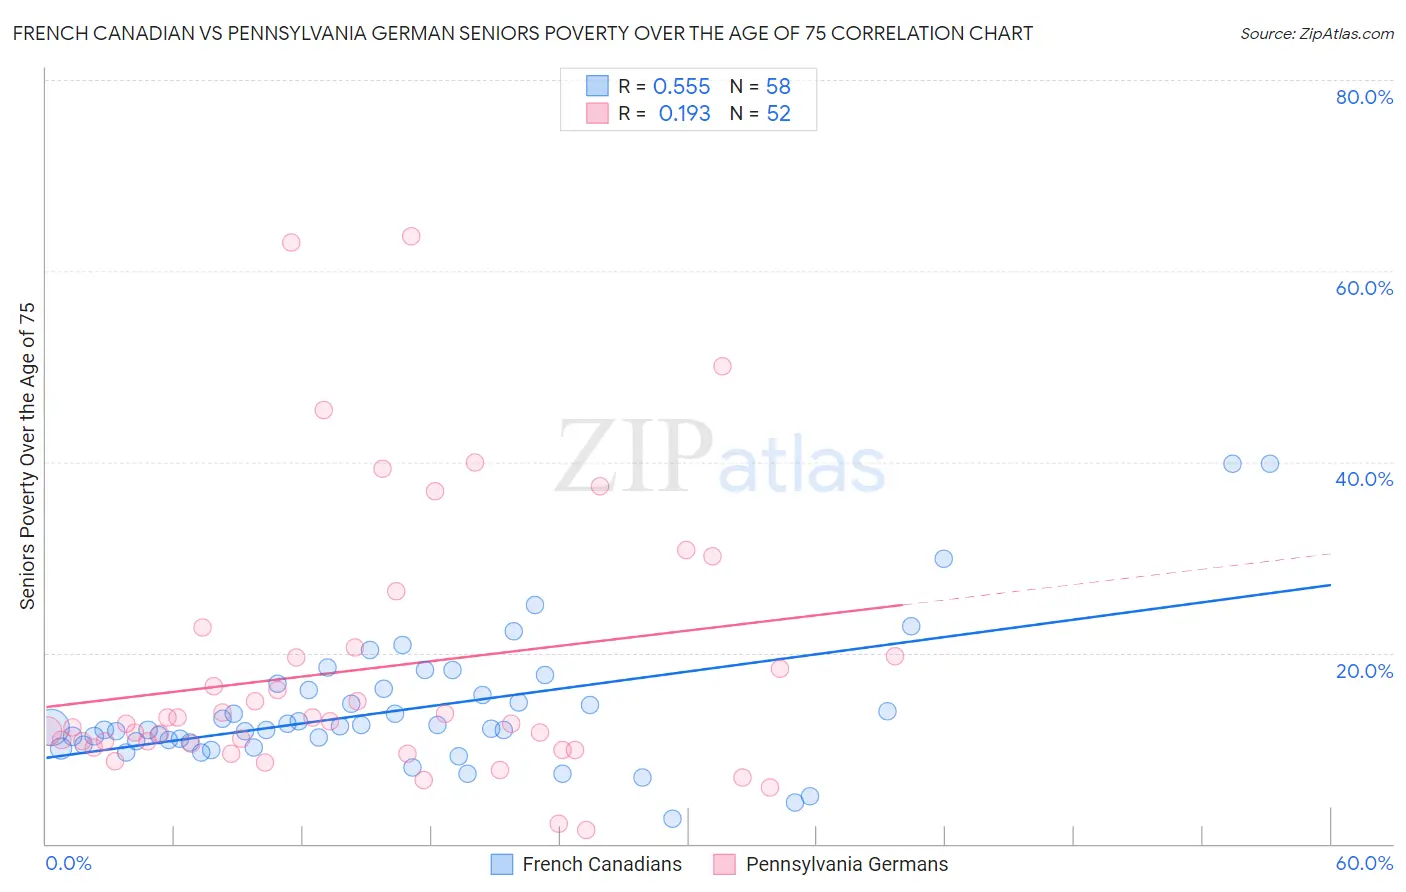 French Canadian vs Pennsylvania German Seniors Poverty Over the Age of 75